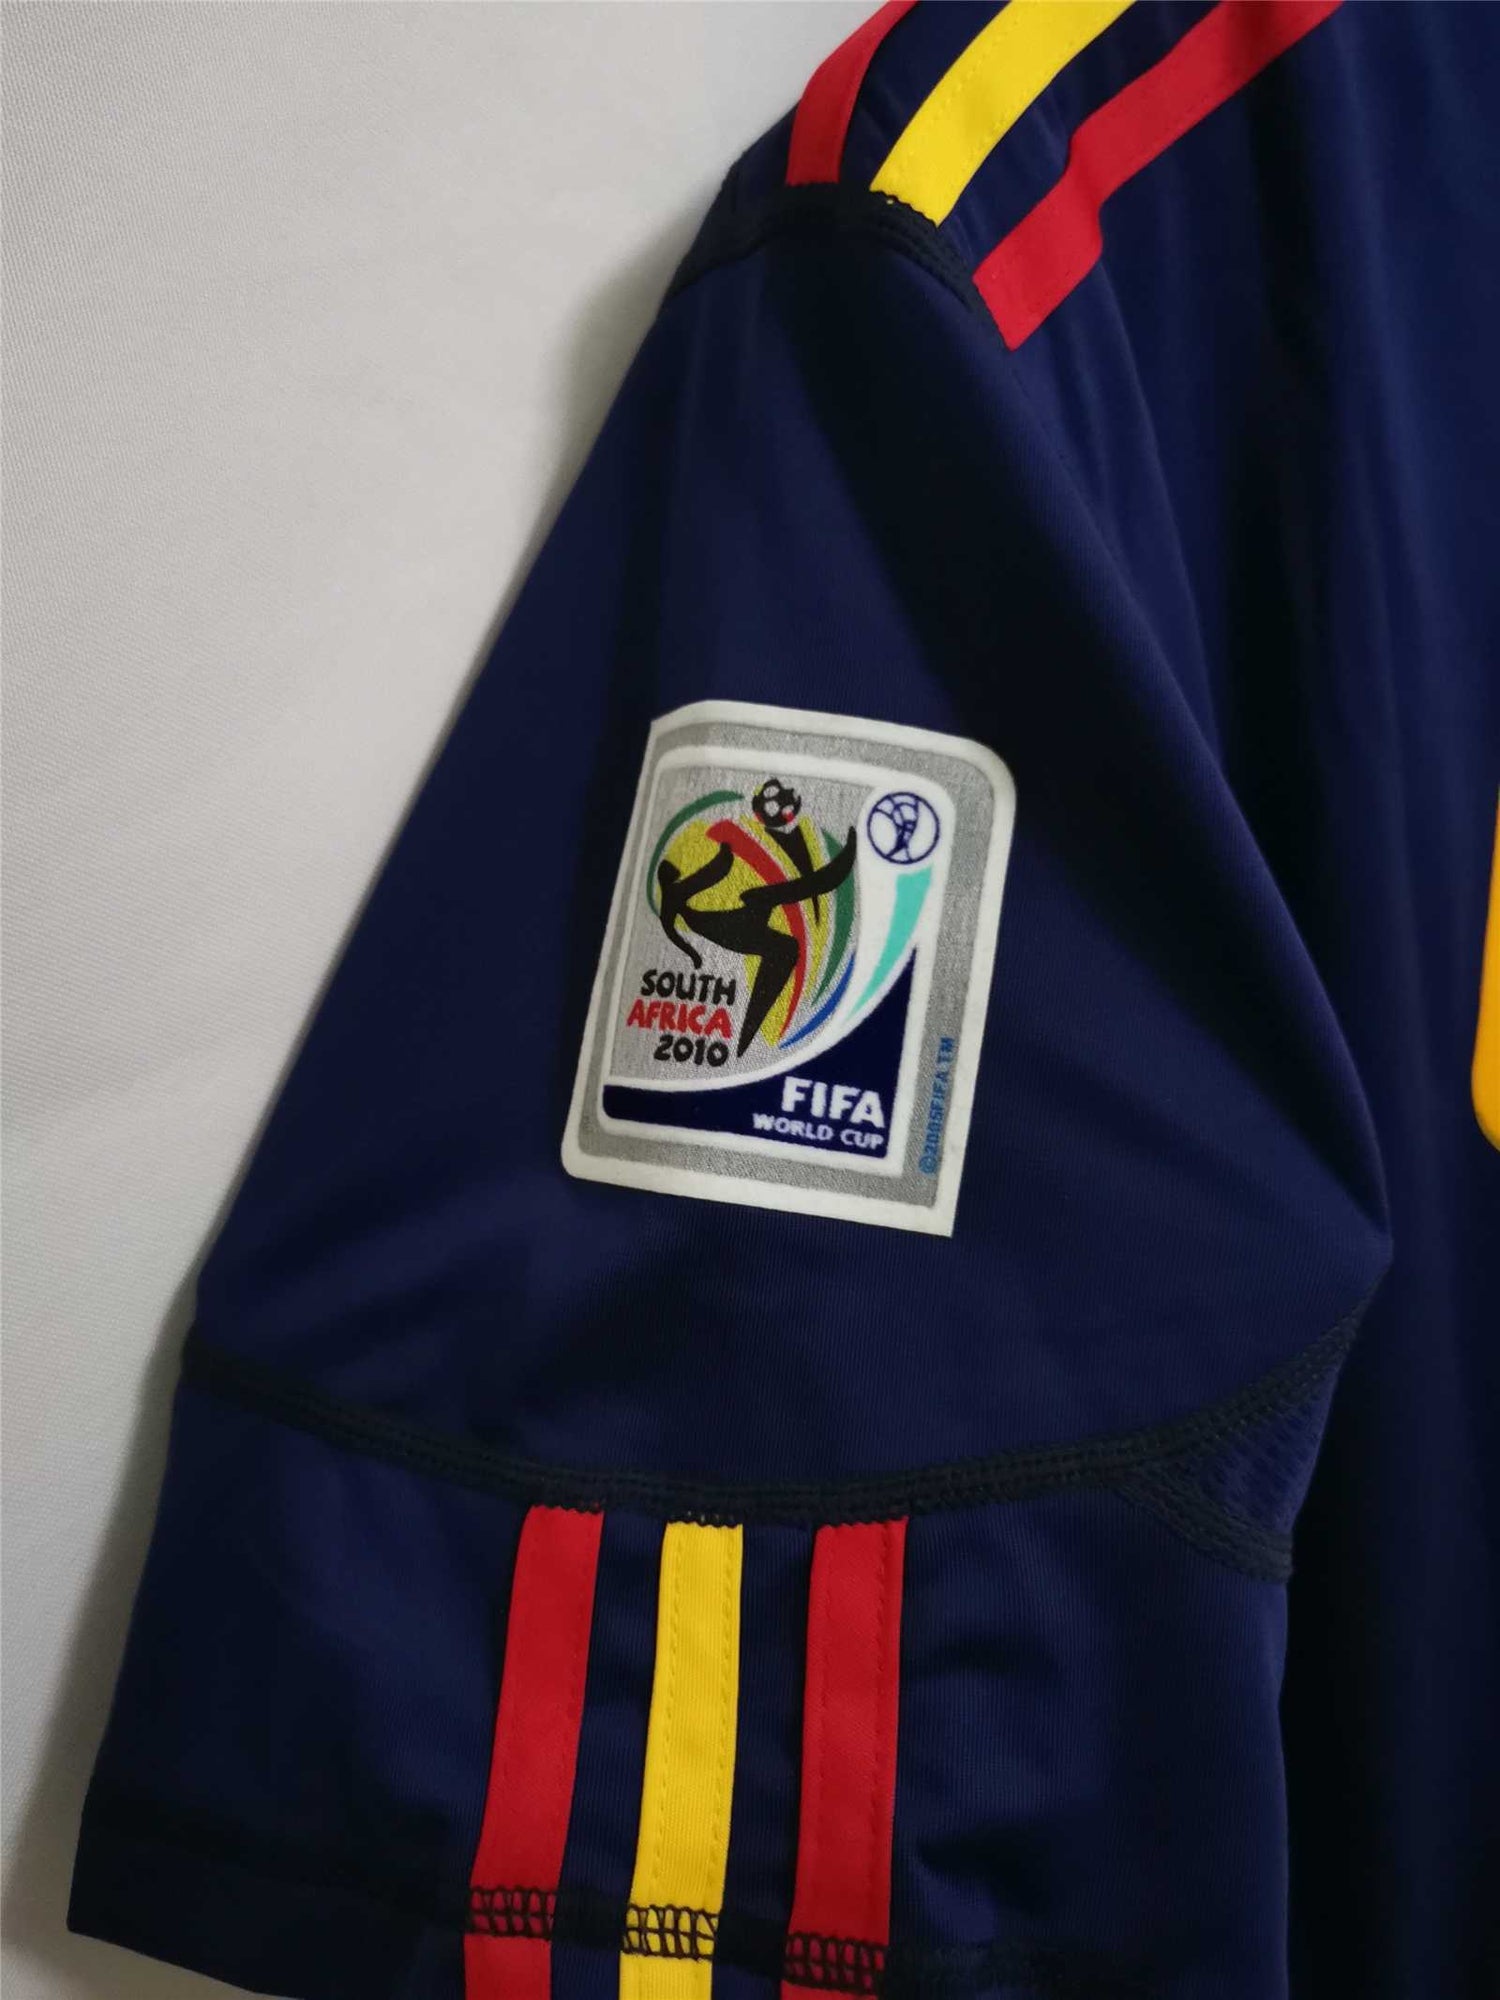 2010 world cup spain jersey